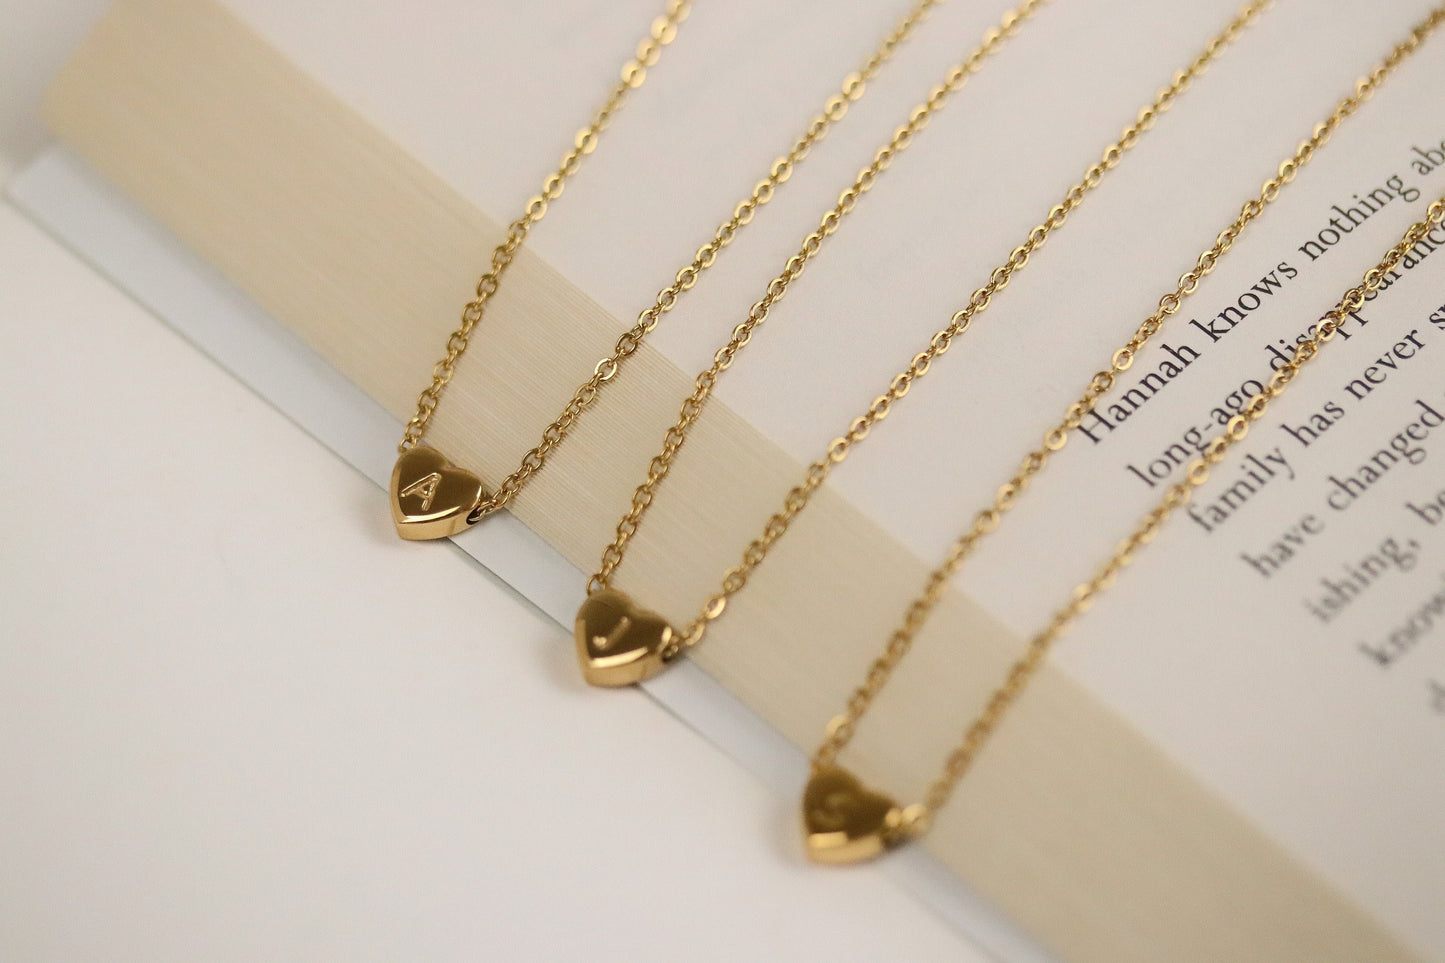 Mother's Day Gift, Handmade Personalized Necklace, Love Heart Necklace for Mum, Gold Minimalist Necklace, Woman Alphabet Gift for Her